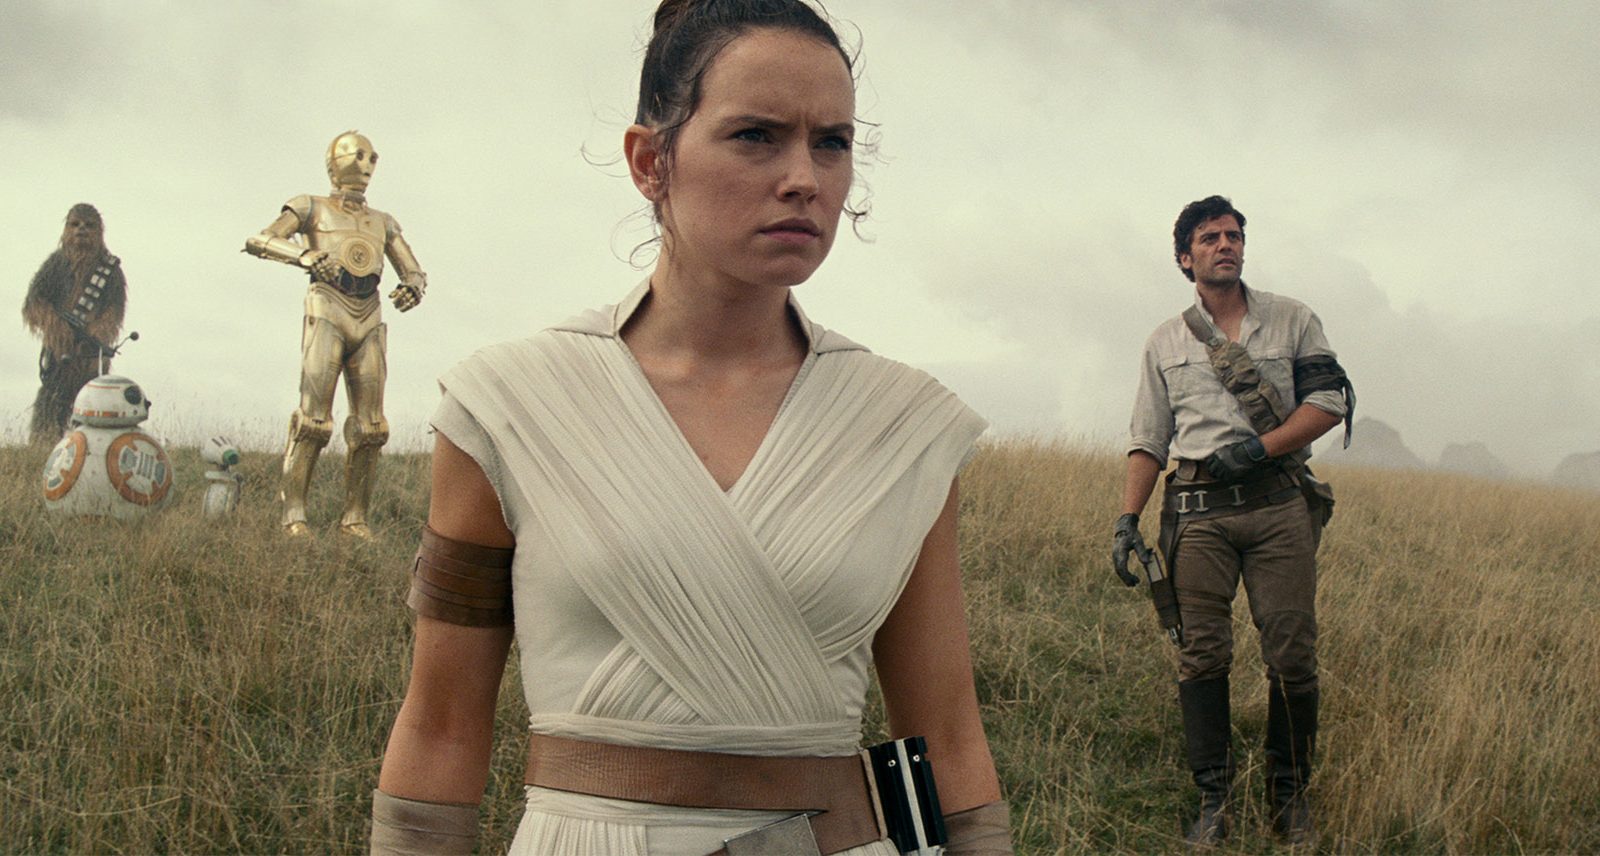 The ‘Star Wars: The Rise of Skywalker’ Trailer Is Here and It’s Giving Nerds Chest Pains